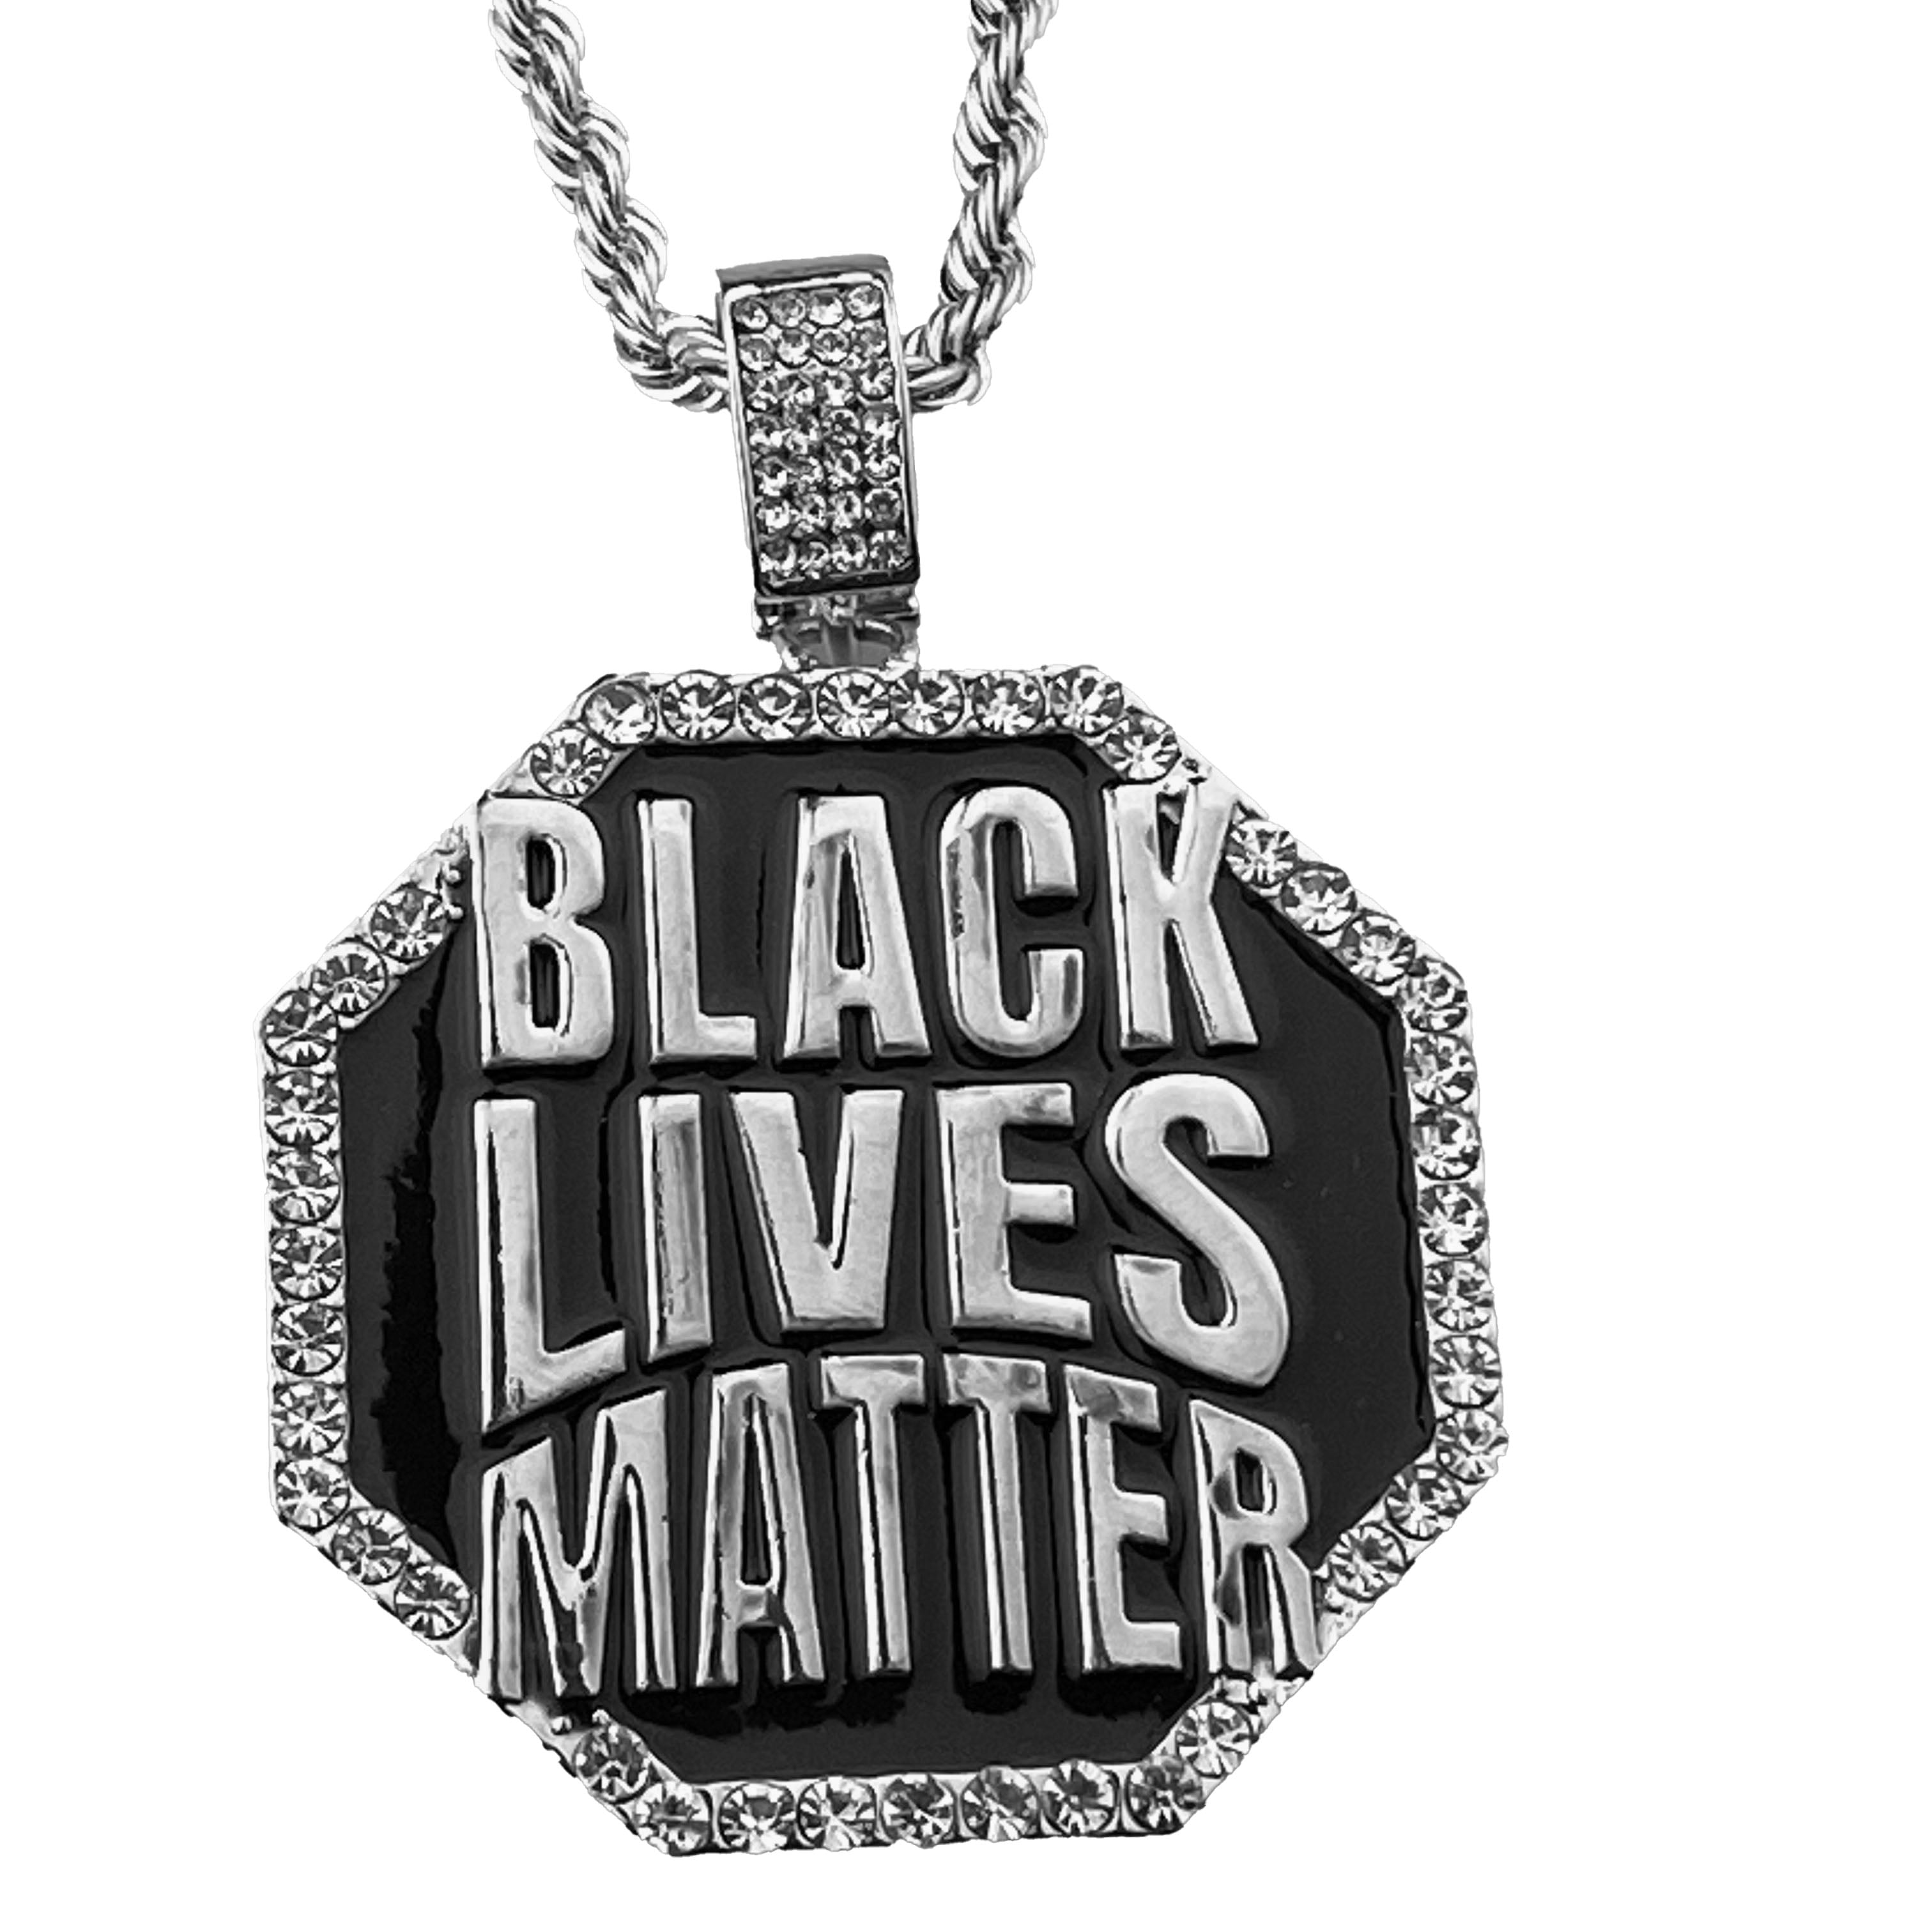 I am black history BLM All lives matter Initial Necklace Black lives matter Jewelry